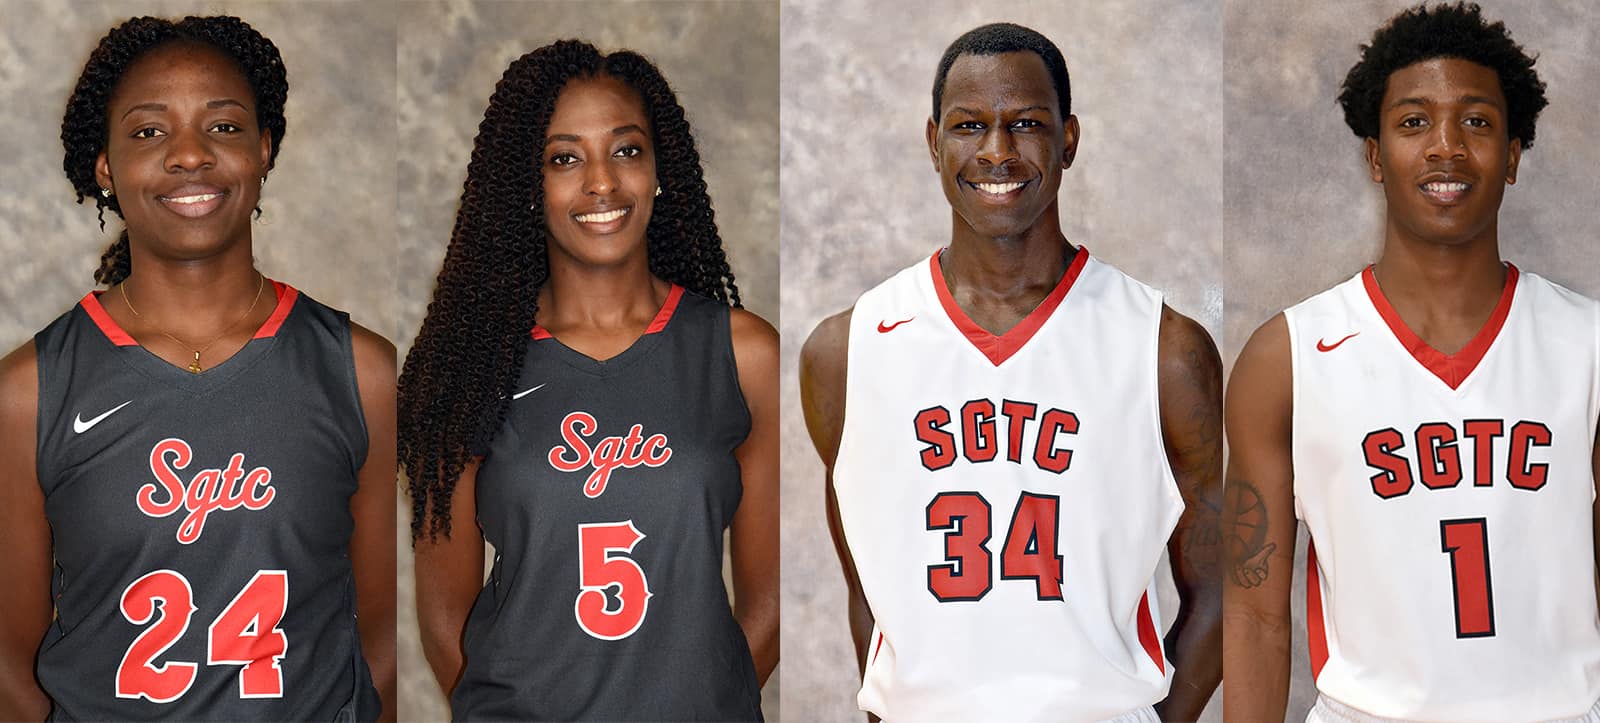 Four South Georgia Technical College Lady Jets and Jets were included in NJCAA individual rankings recently. Esther Adenike (24), Houlfat Mahouchiza (5) Marquel Wiggins (34) and Rico Simmons (1) were recognized for their talents on the court.